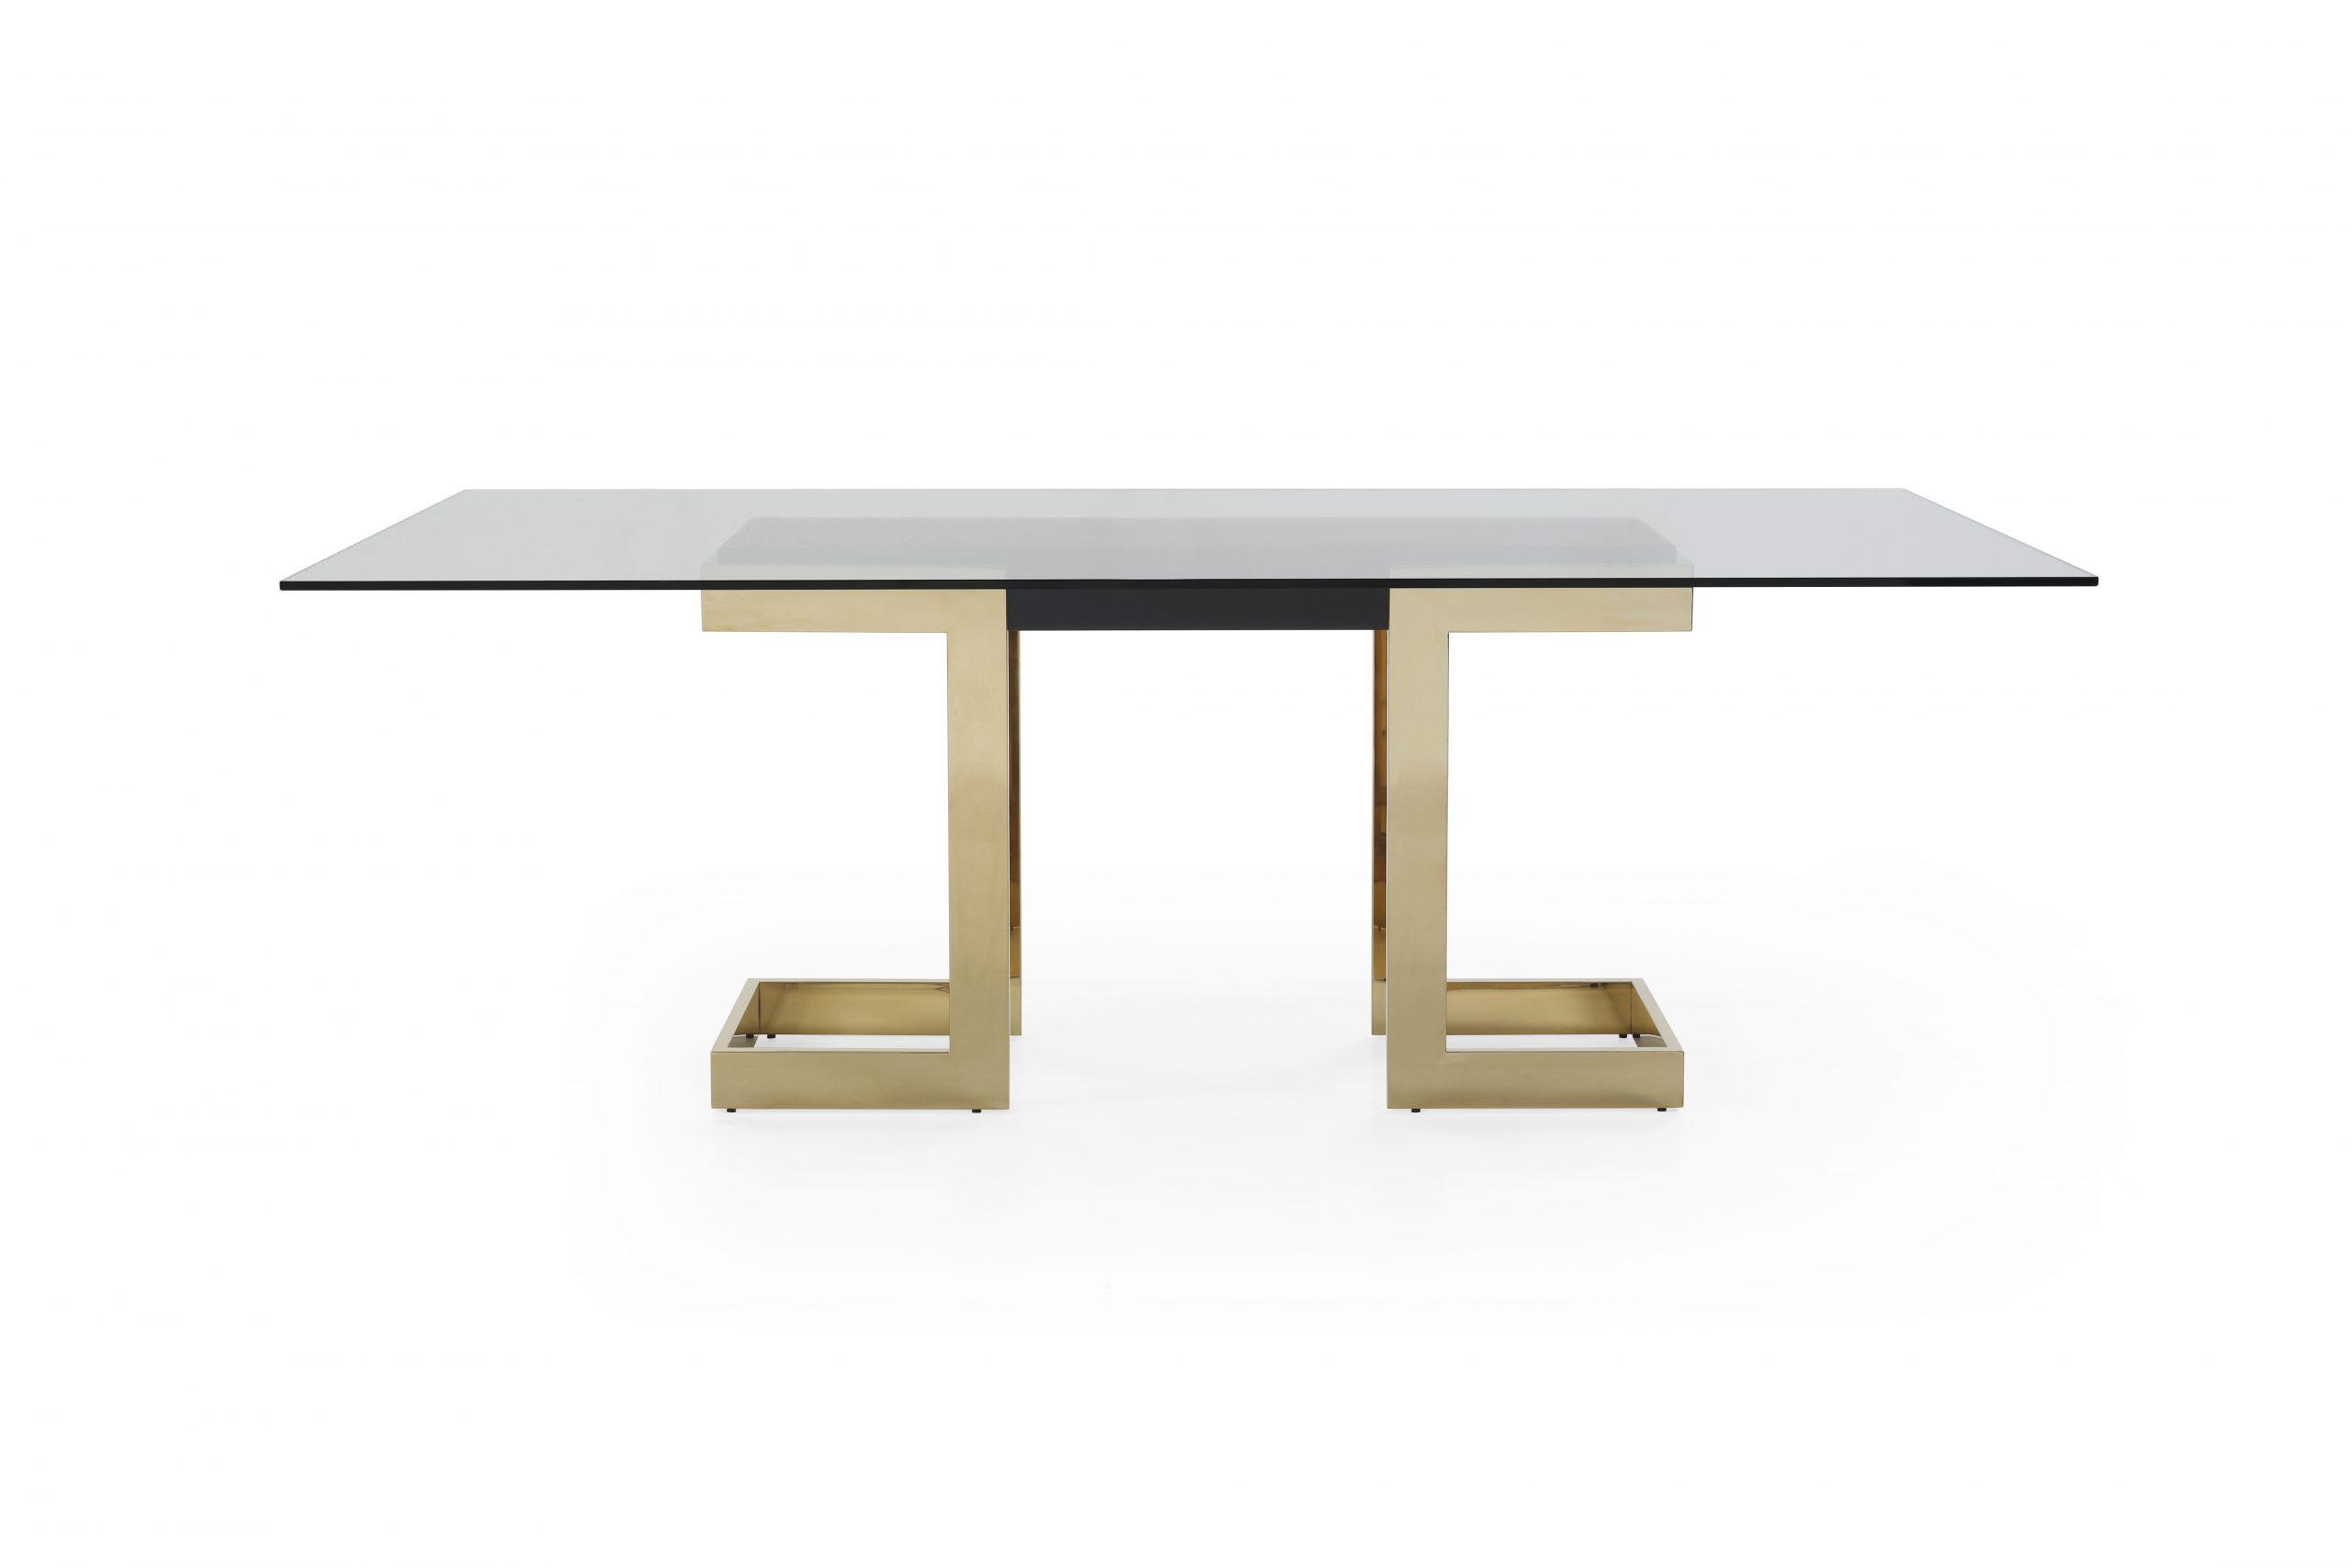 Contemporary Dining Table DT1658-BLK Sumo DT1658-BLK in Gold 